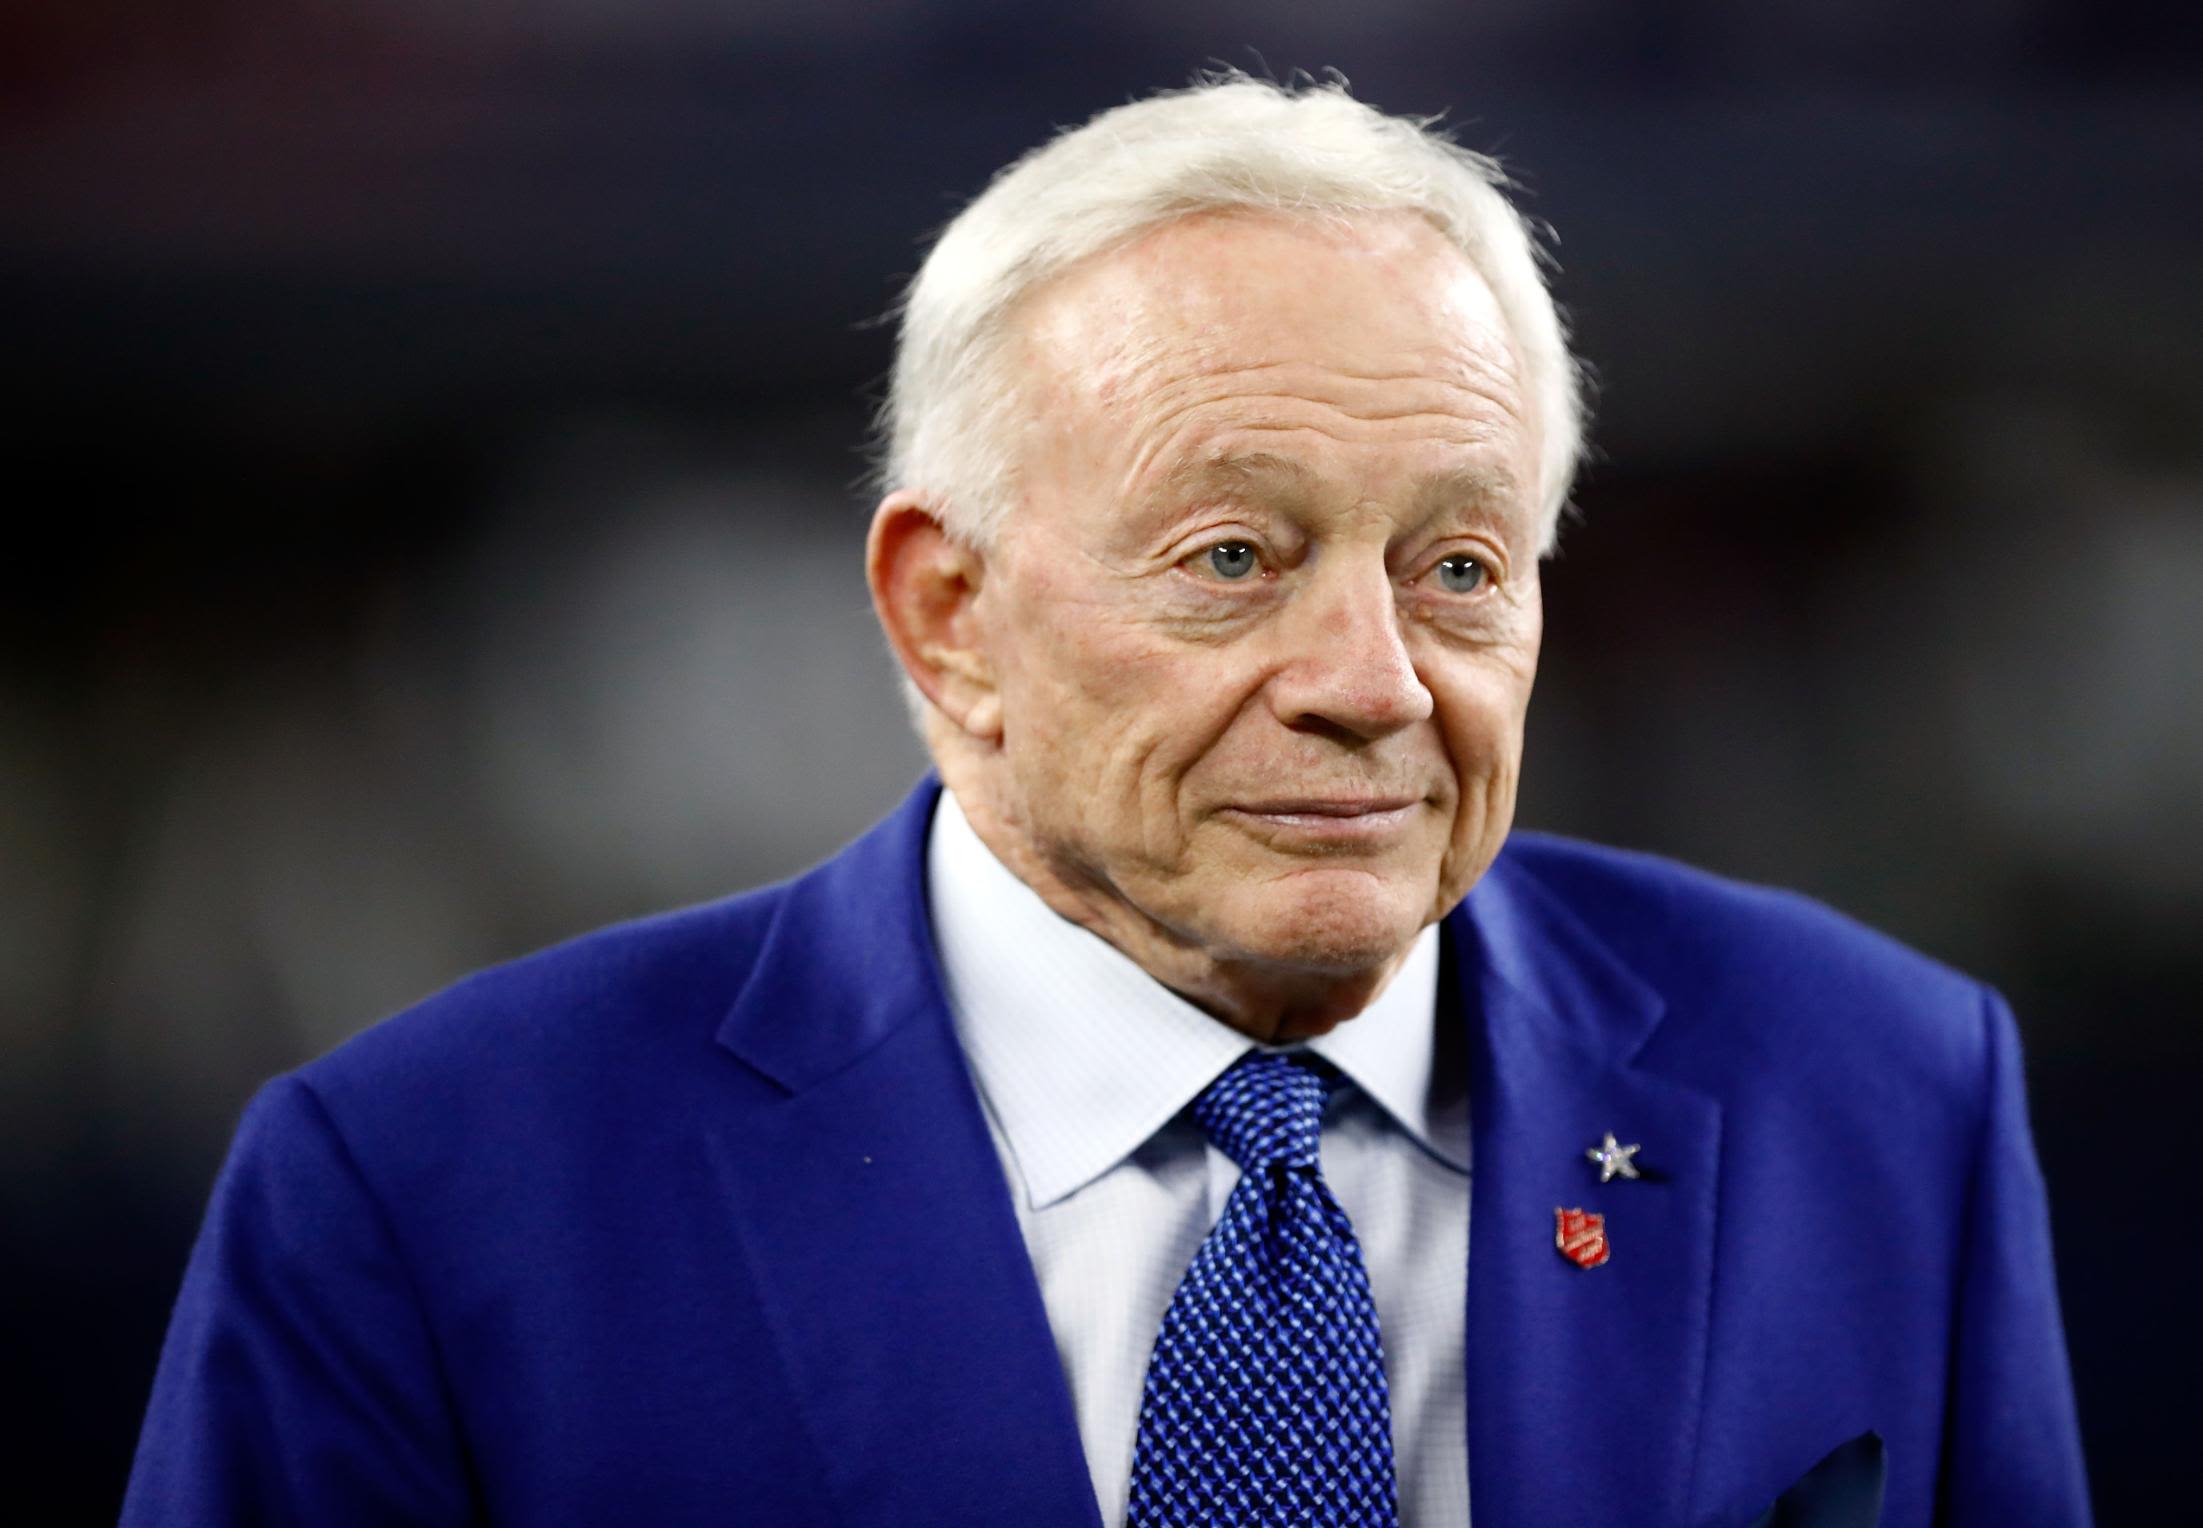  NFL Insider Explains Dallas Cowboys' Strategy on Skipping Running Back in Draft